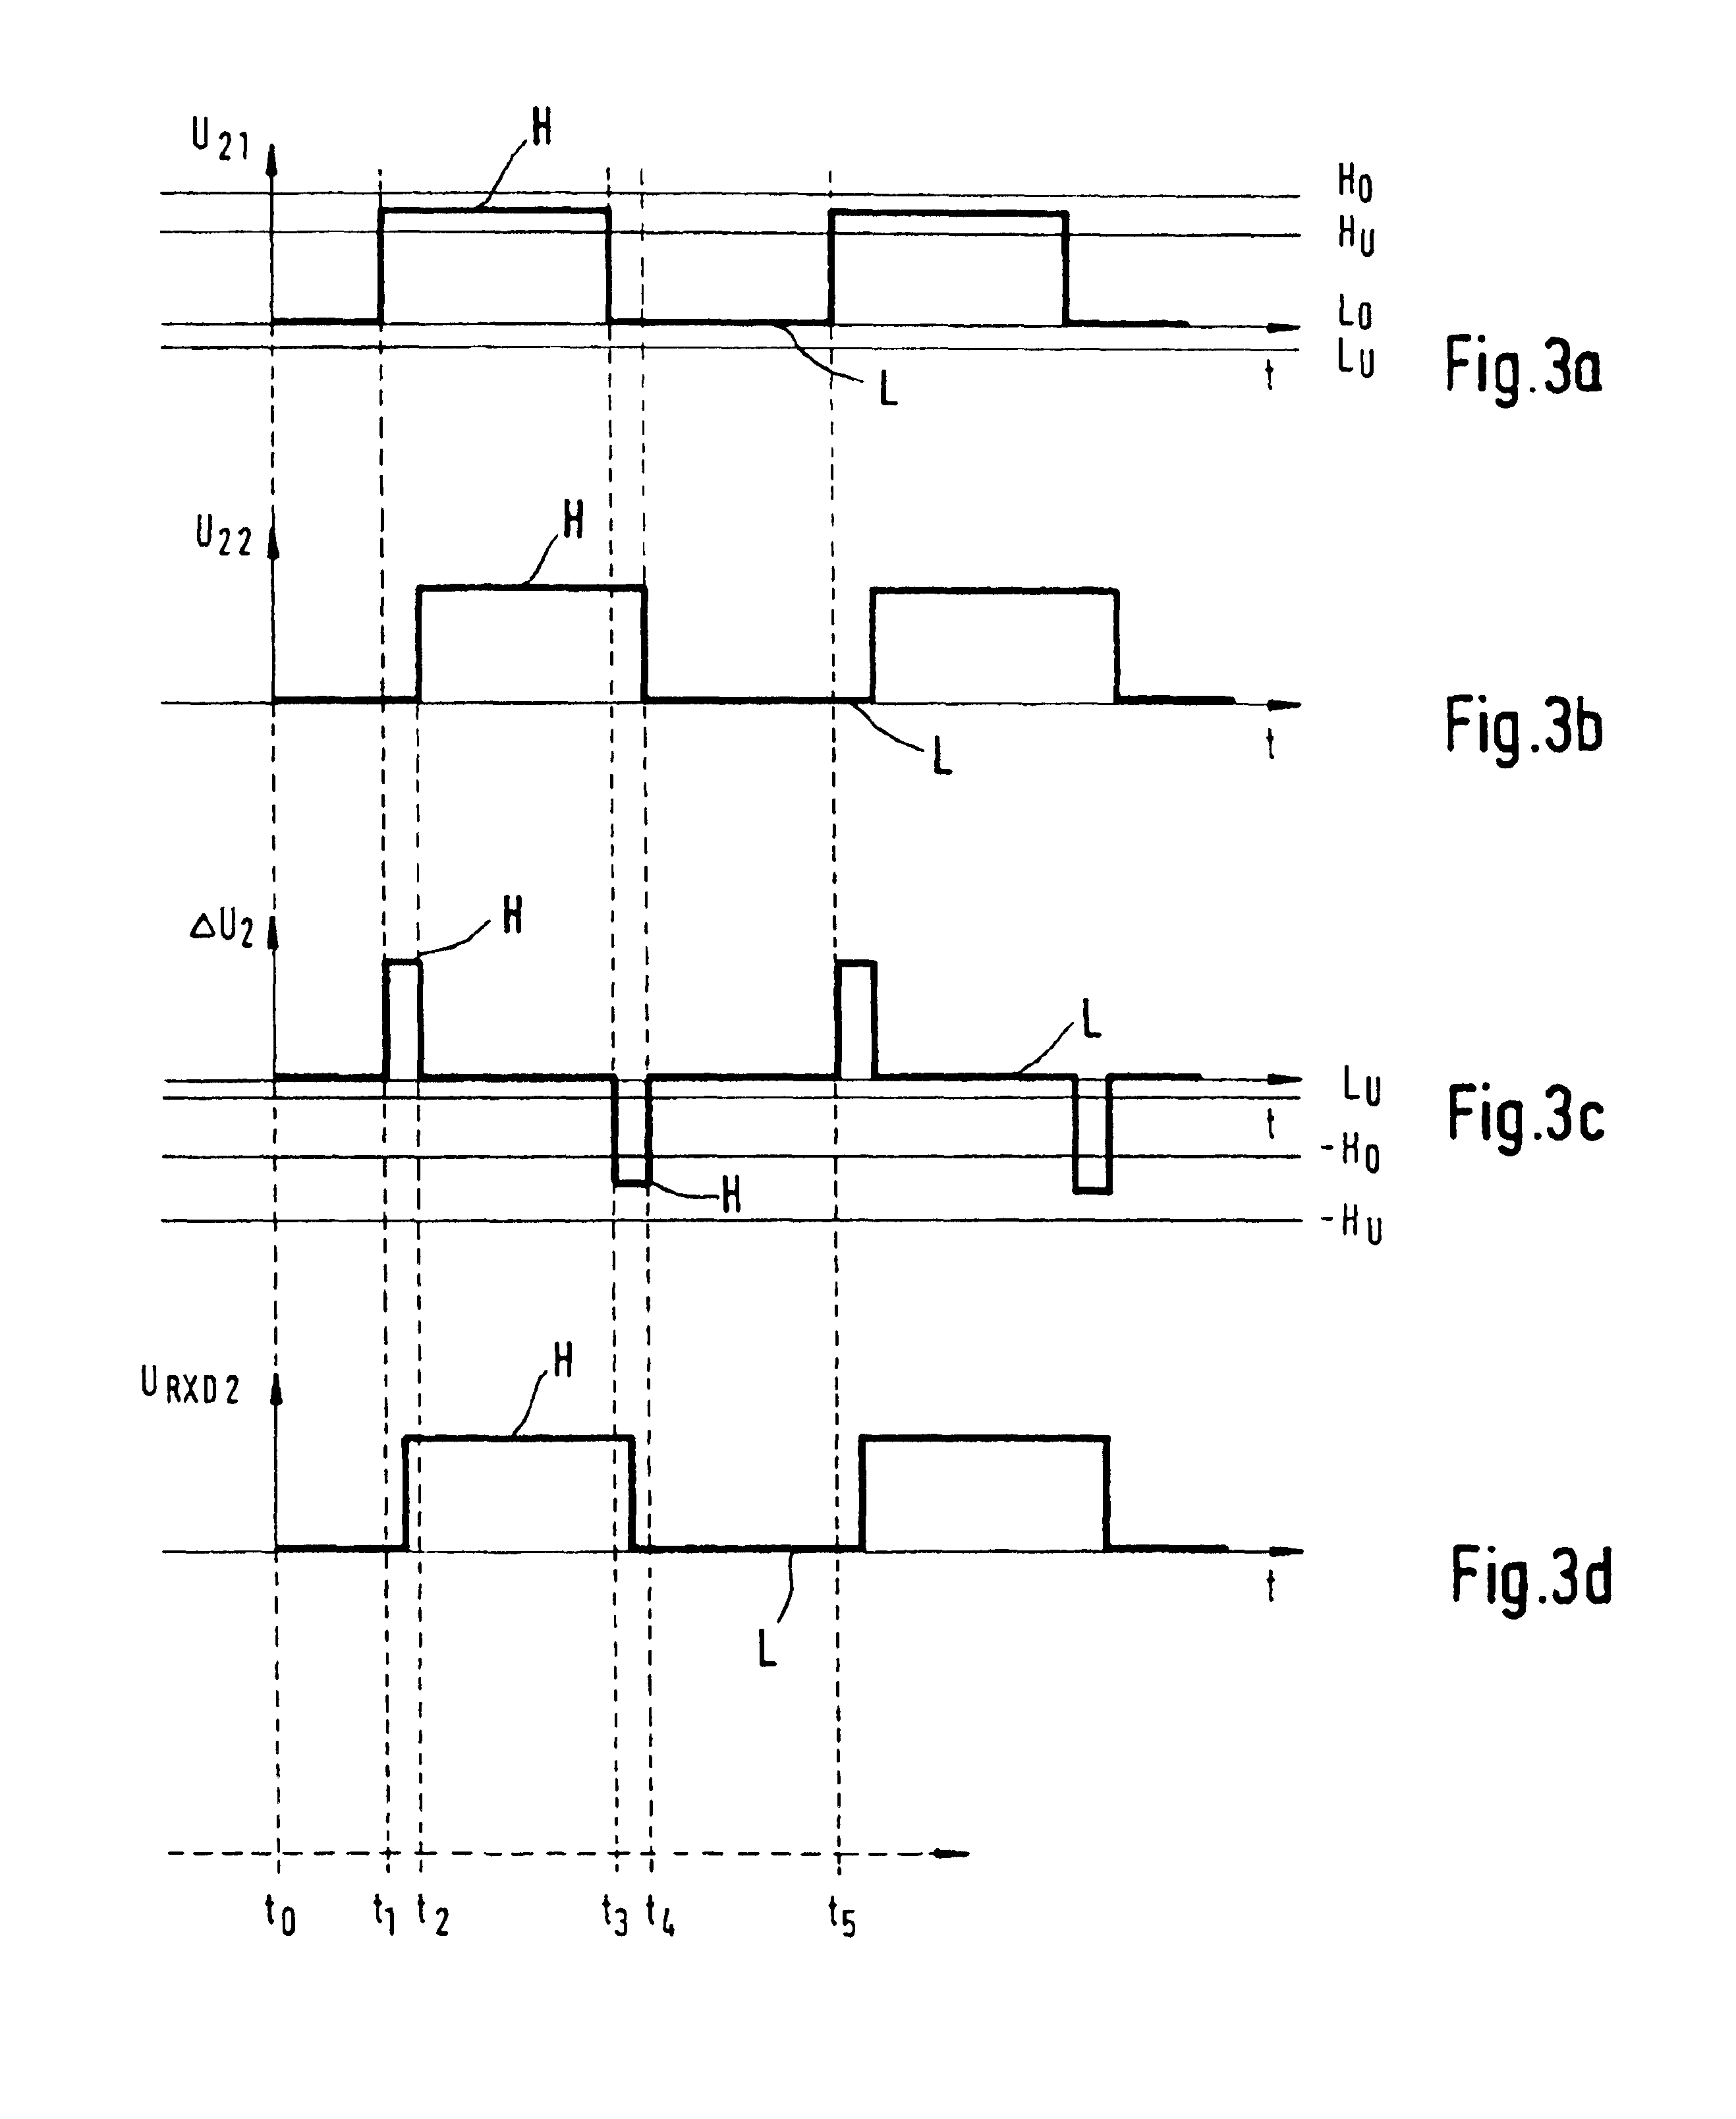 Circuit arrangement for the electrically isolated transfer of digital signals